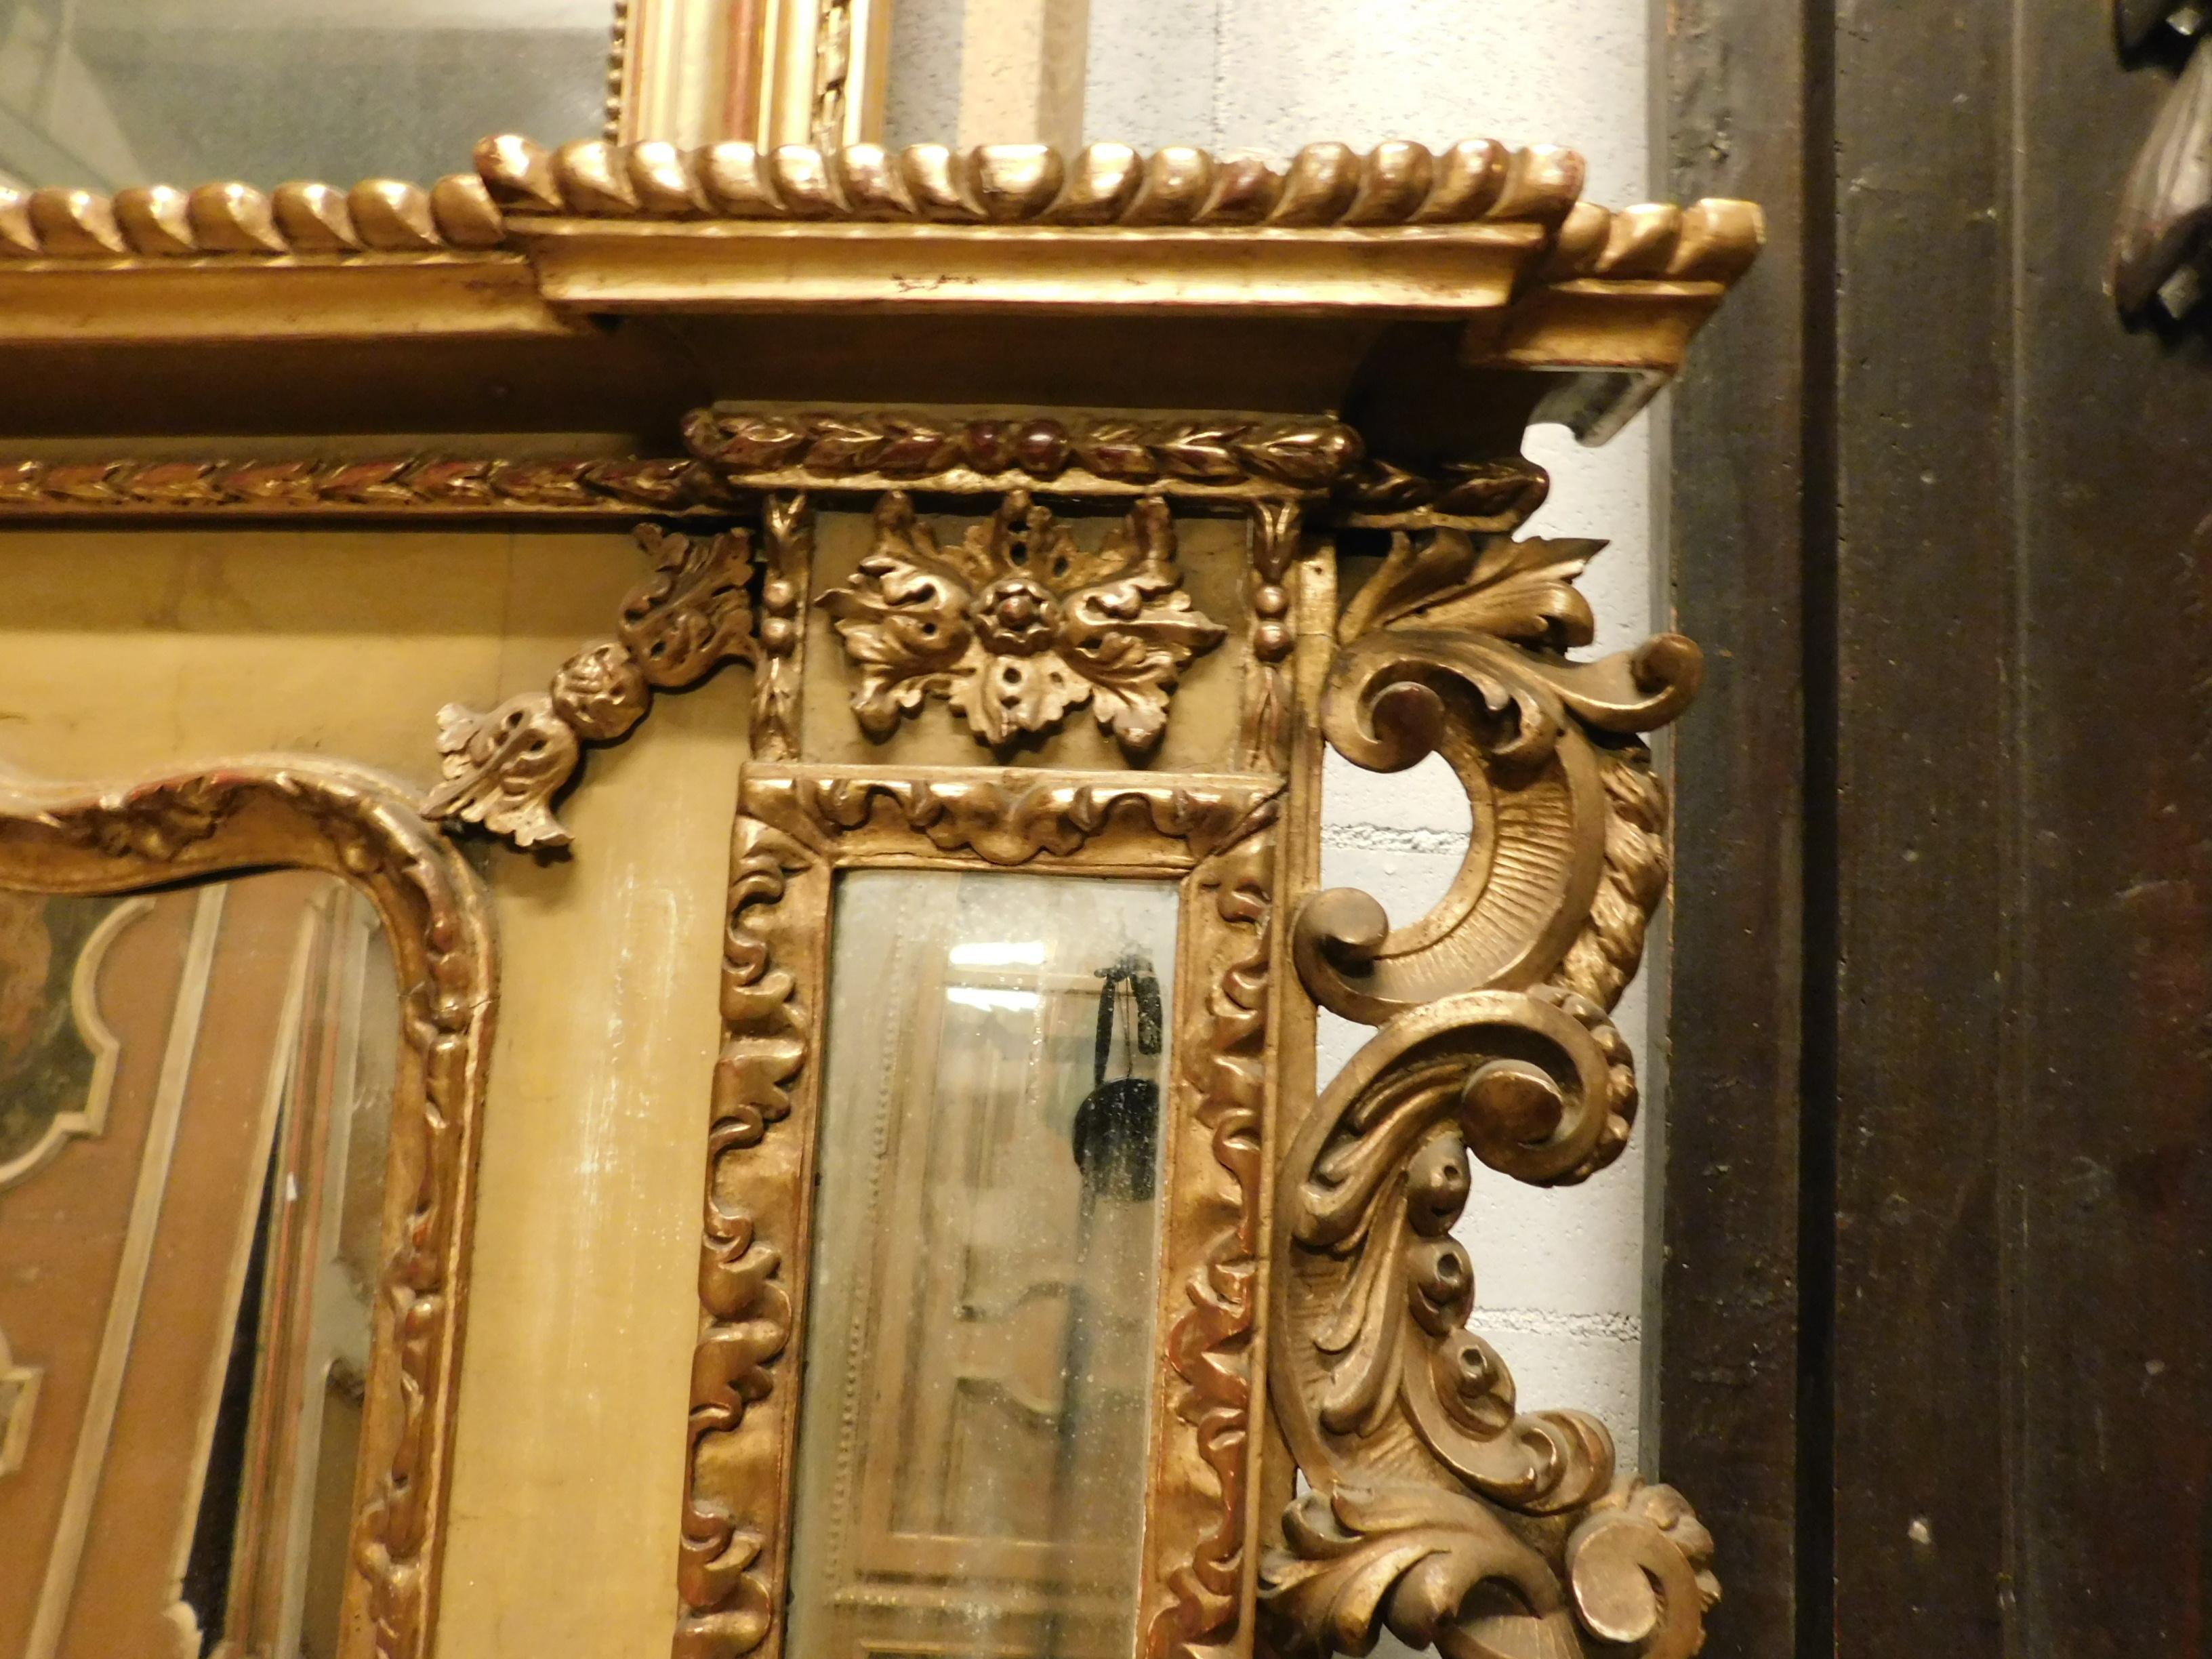 20th Century Antique Rectangular Lacquered Gilded Mirror, Carved with Flowers, '900 Italy For Sale